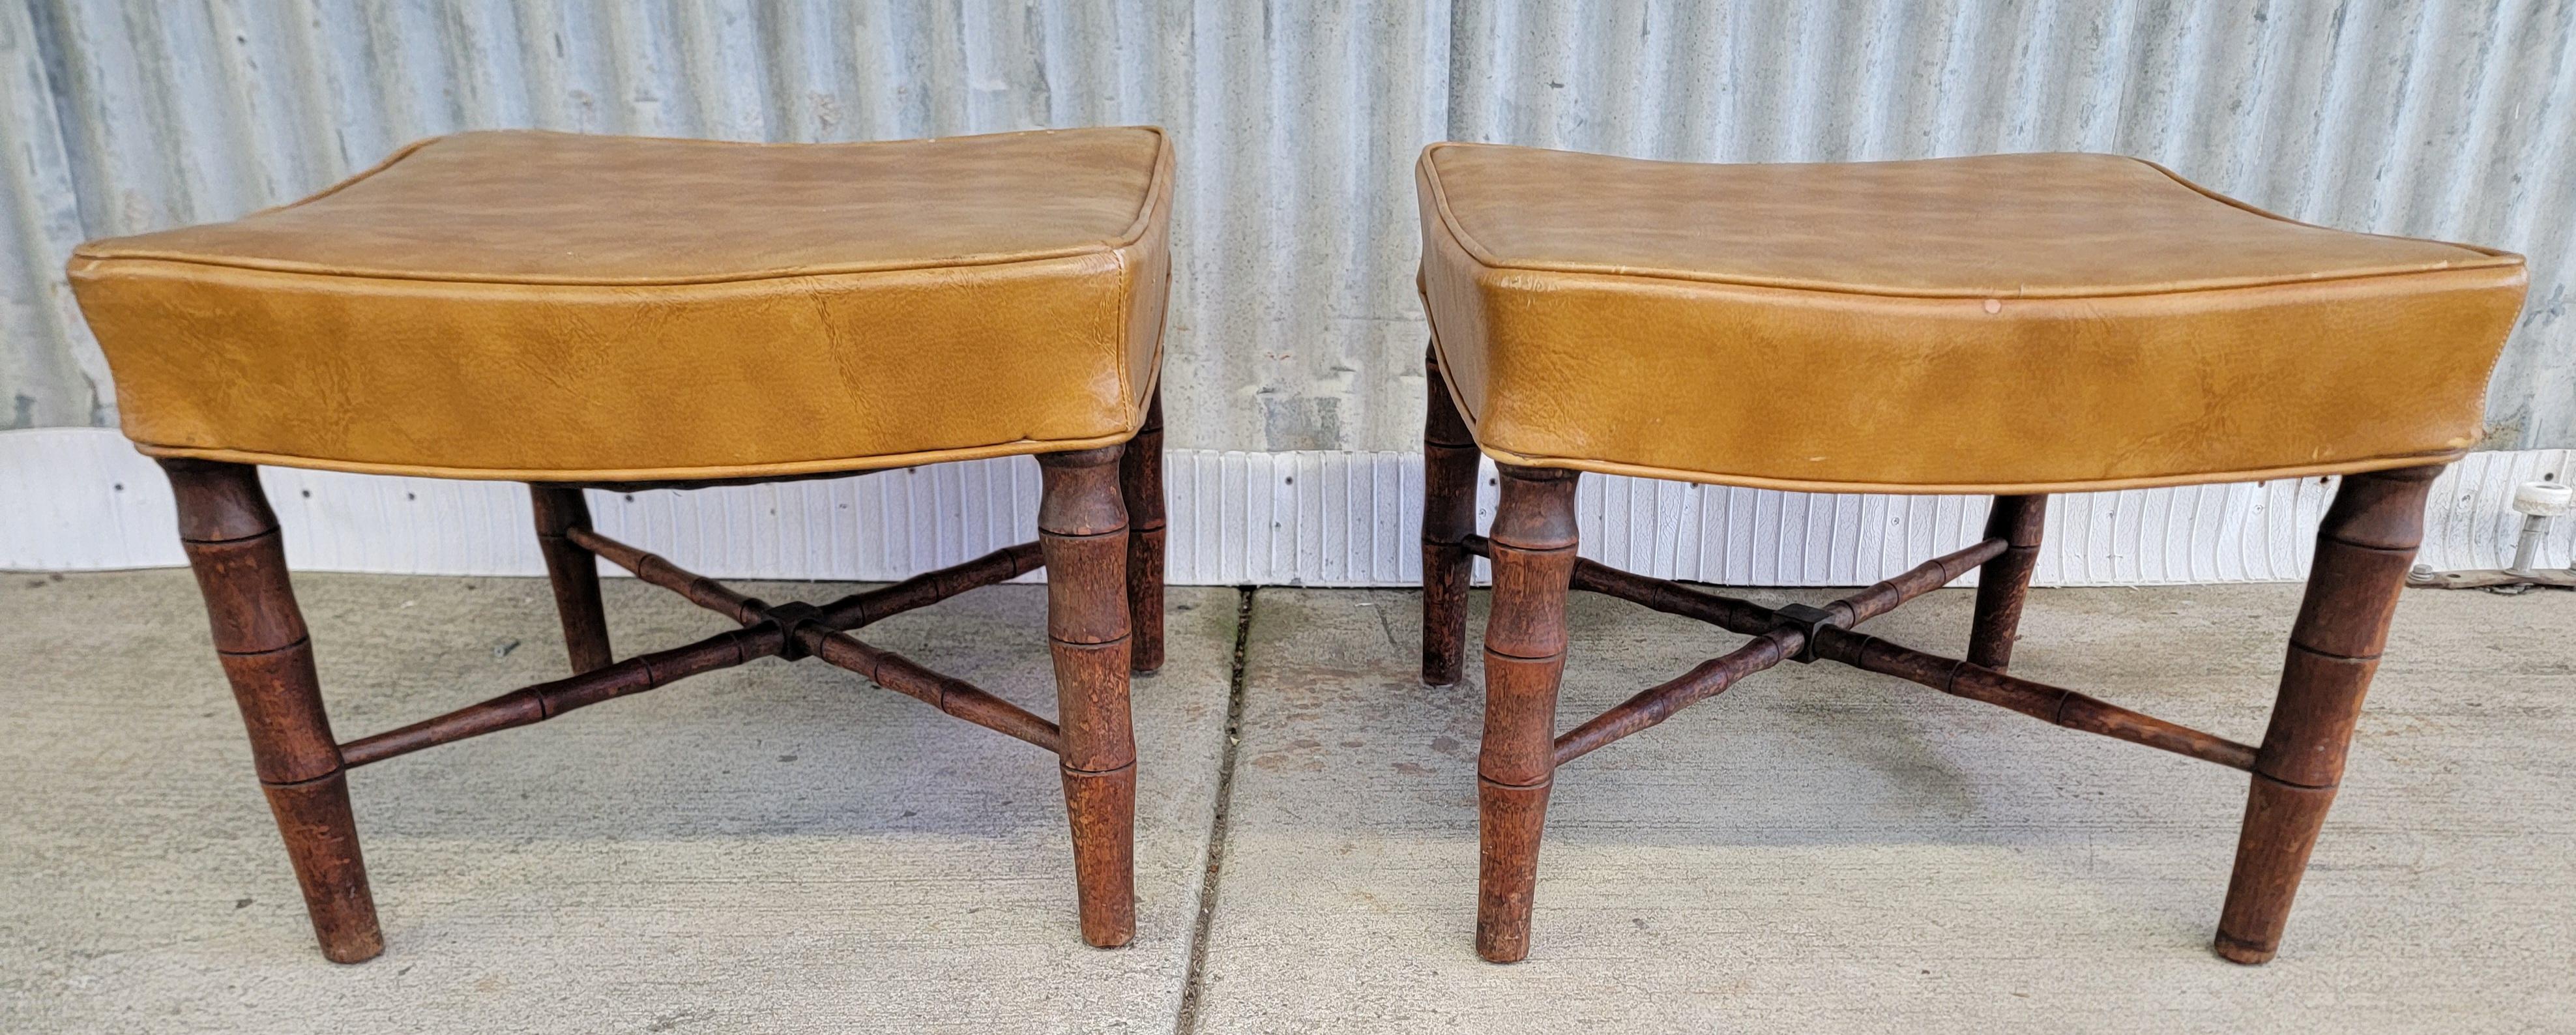 A pair of turned mahogany footstools or ottomans with a faux bamboo detail. Circa. 1950's. Older re-upholstery with a shop tag dated 1970. Presentable as they are, but there is light wear to vinyl upholstery and the solid mahogany frames have